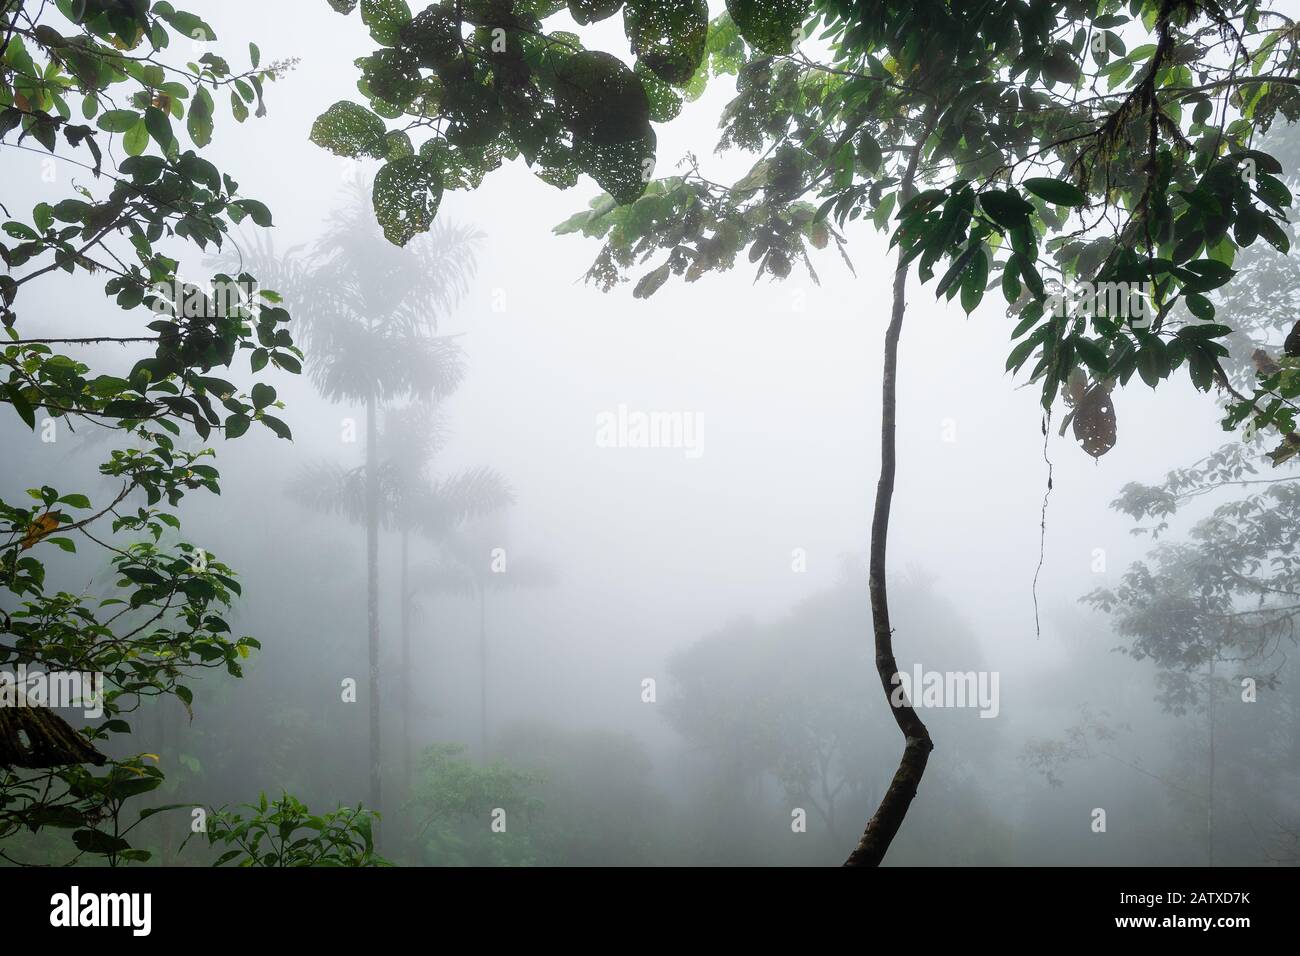 Cloud forest – Amagusa, fogy view inside the tropical forest in Amagusa, South America forests, western Andean slopes, Ecuador. Stock Photo